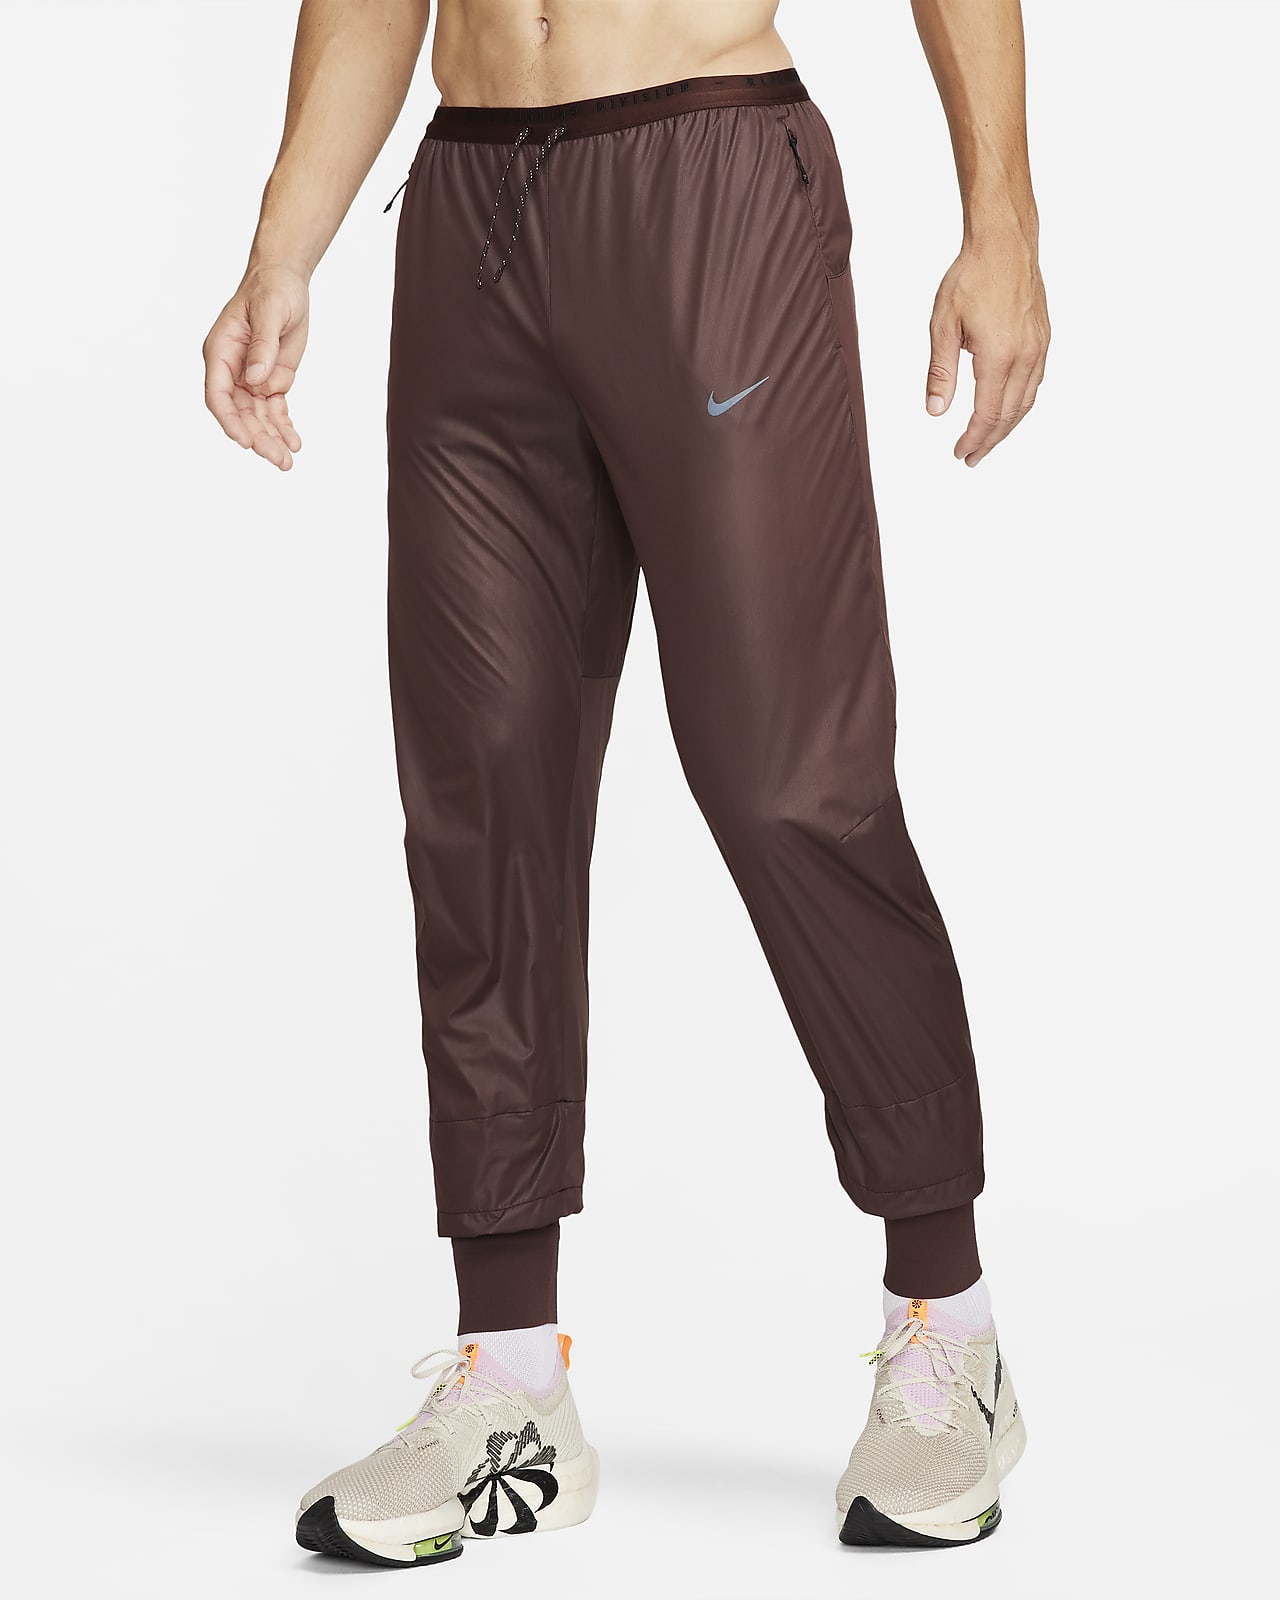 Nike Therma-Fit Run Division Pants - Running trousers Women's